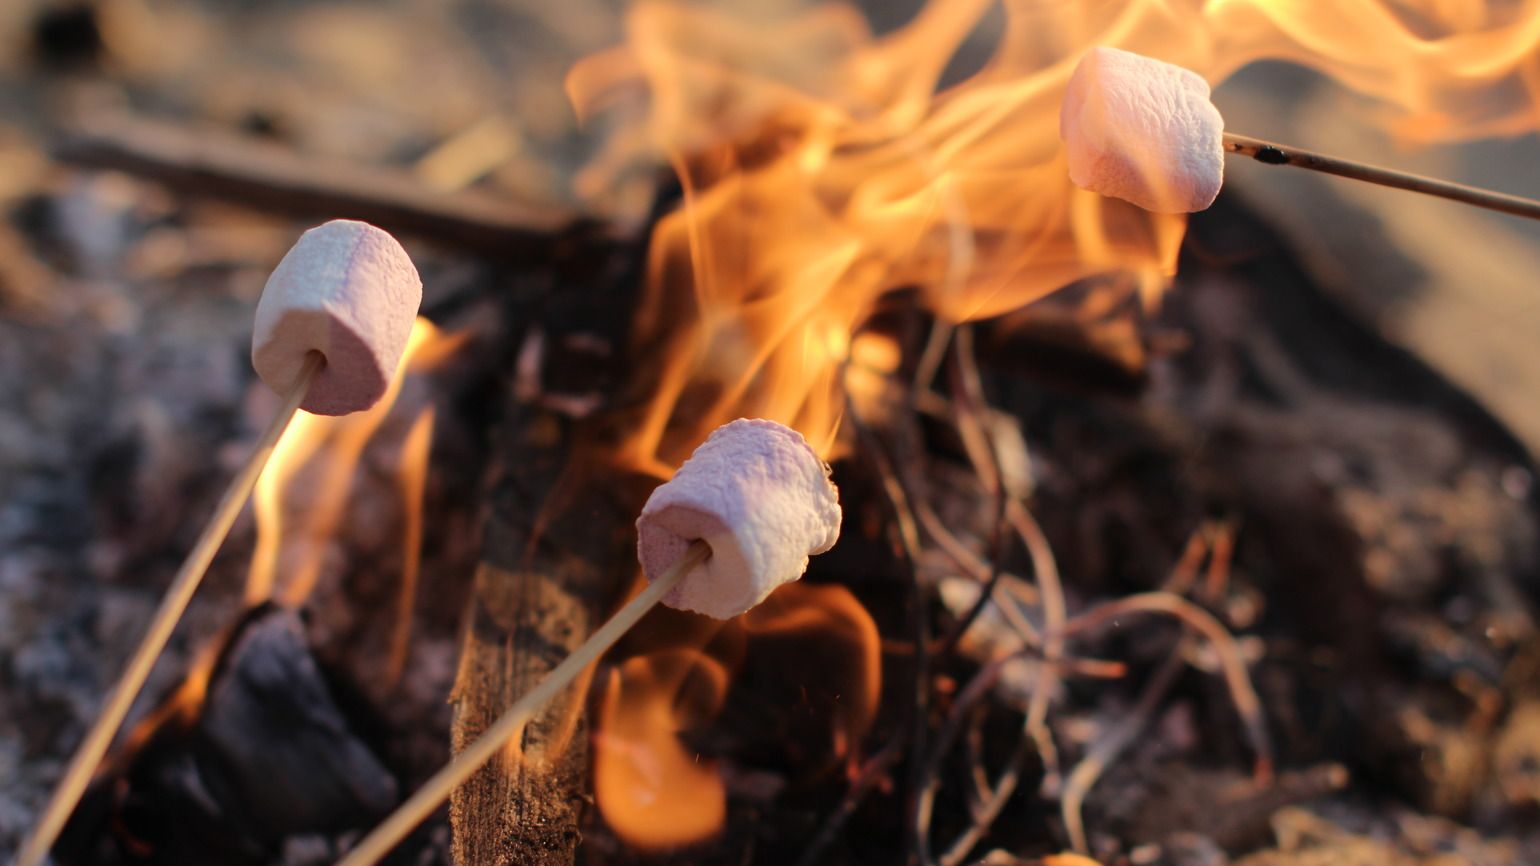 fire roasted marshmallows (Getty)